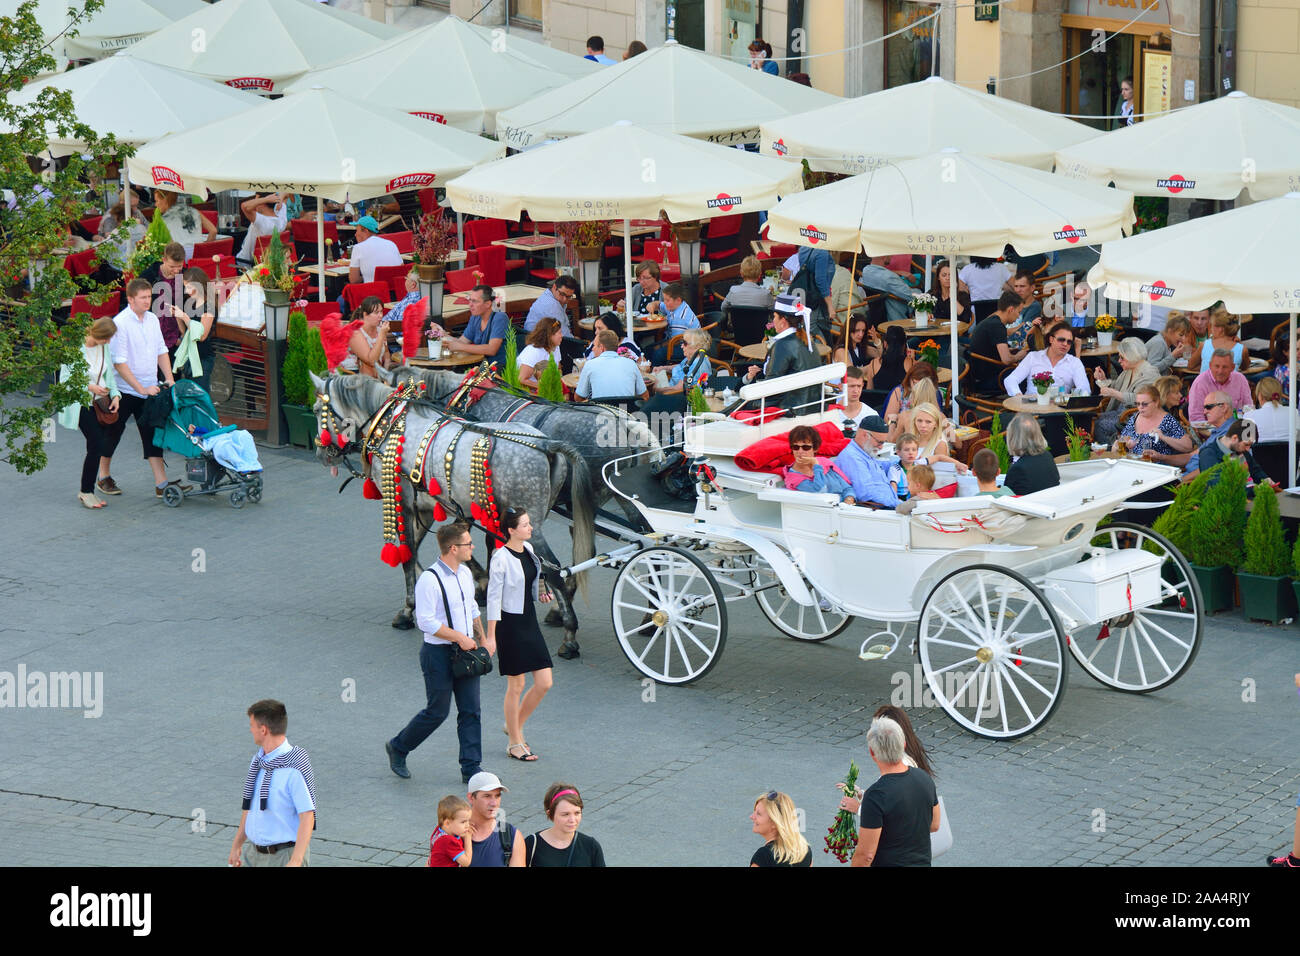 Traditional horse carriage in the main square of Krakow. Poland Stock Photo